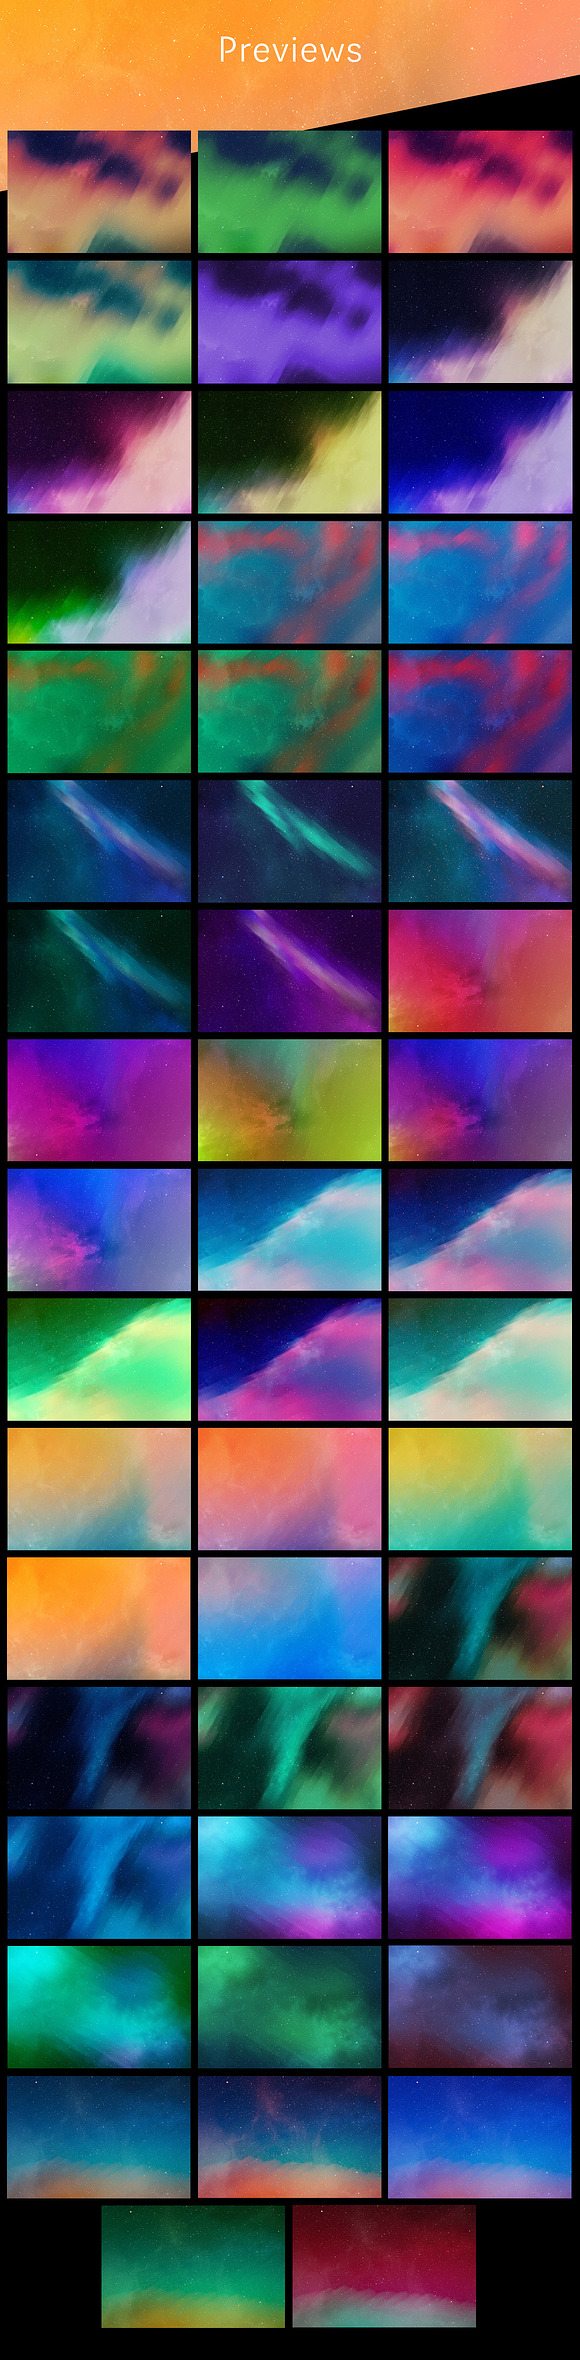 80 Polar Backgrounds in Textures - product preview 1